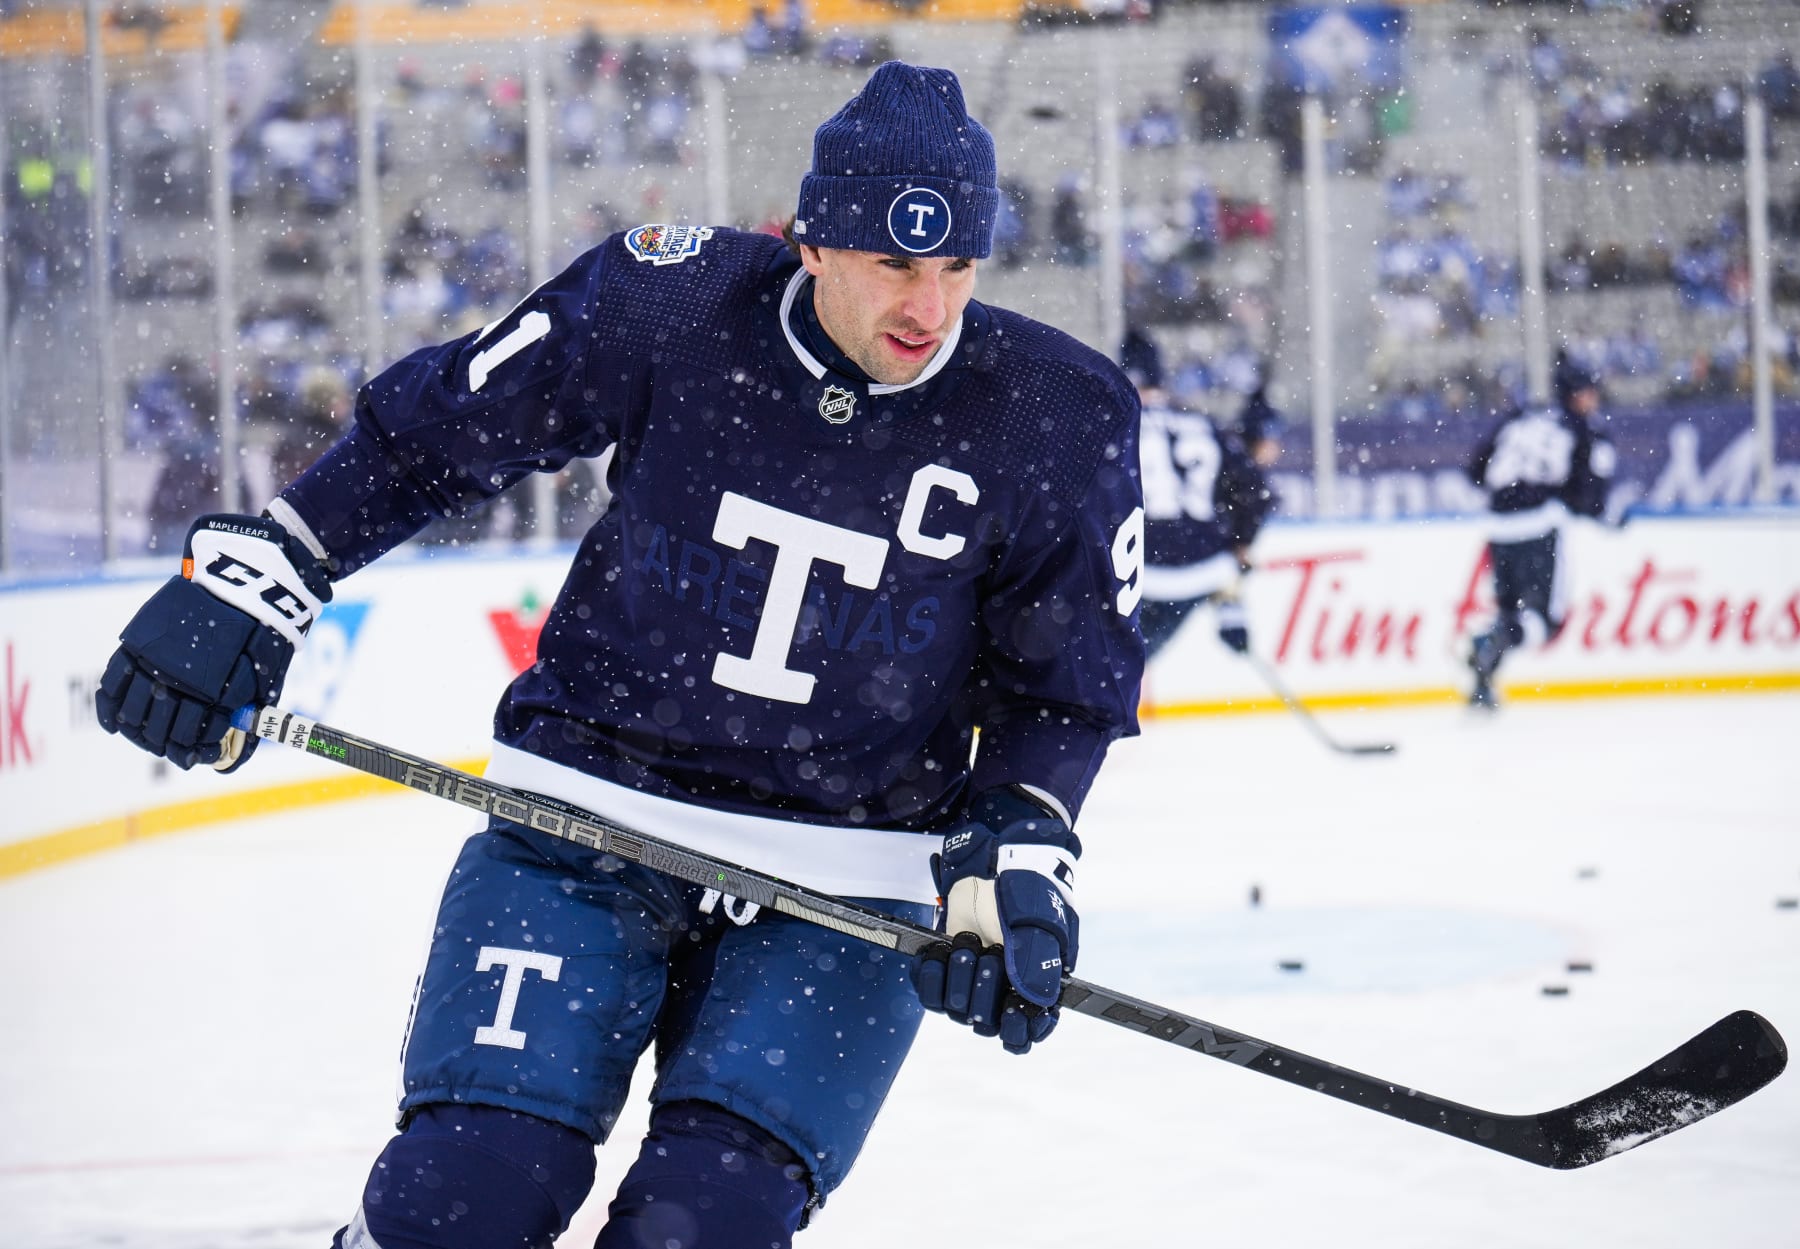 Toronto Maple Leafs Winter Classic Jersey Package